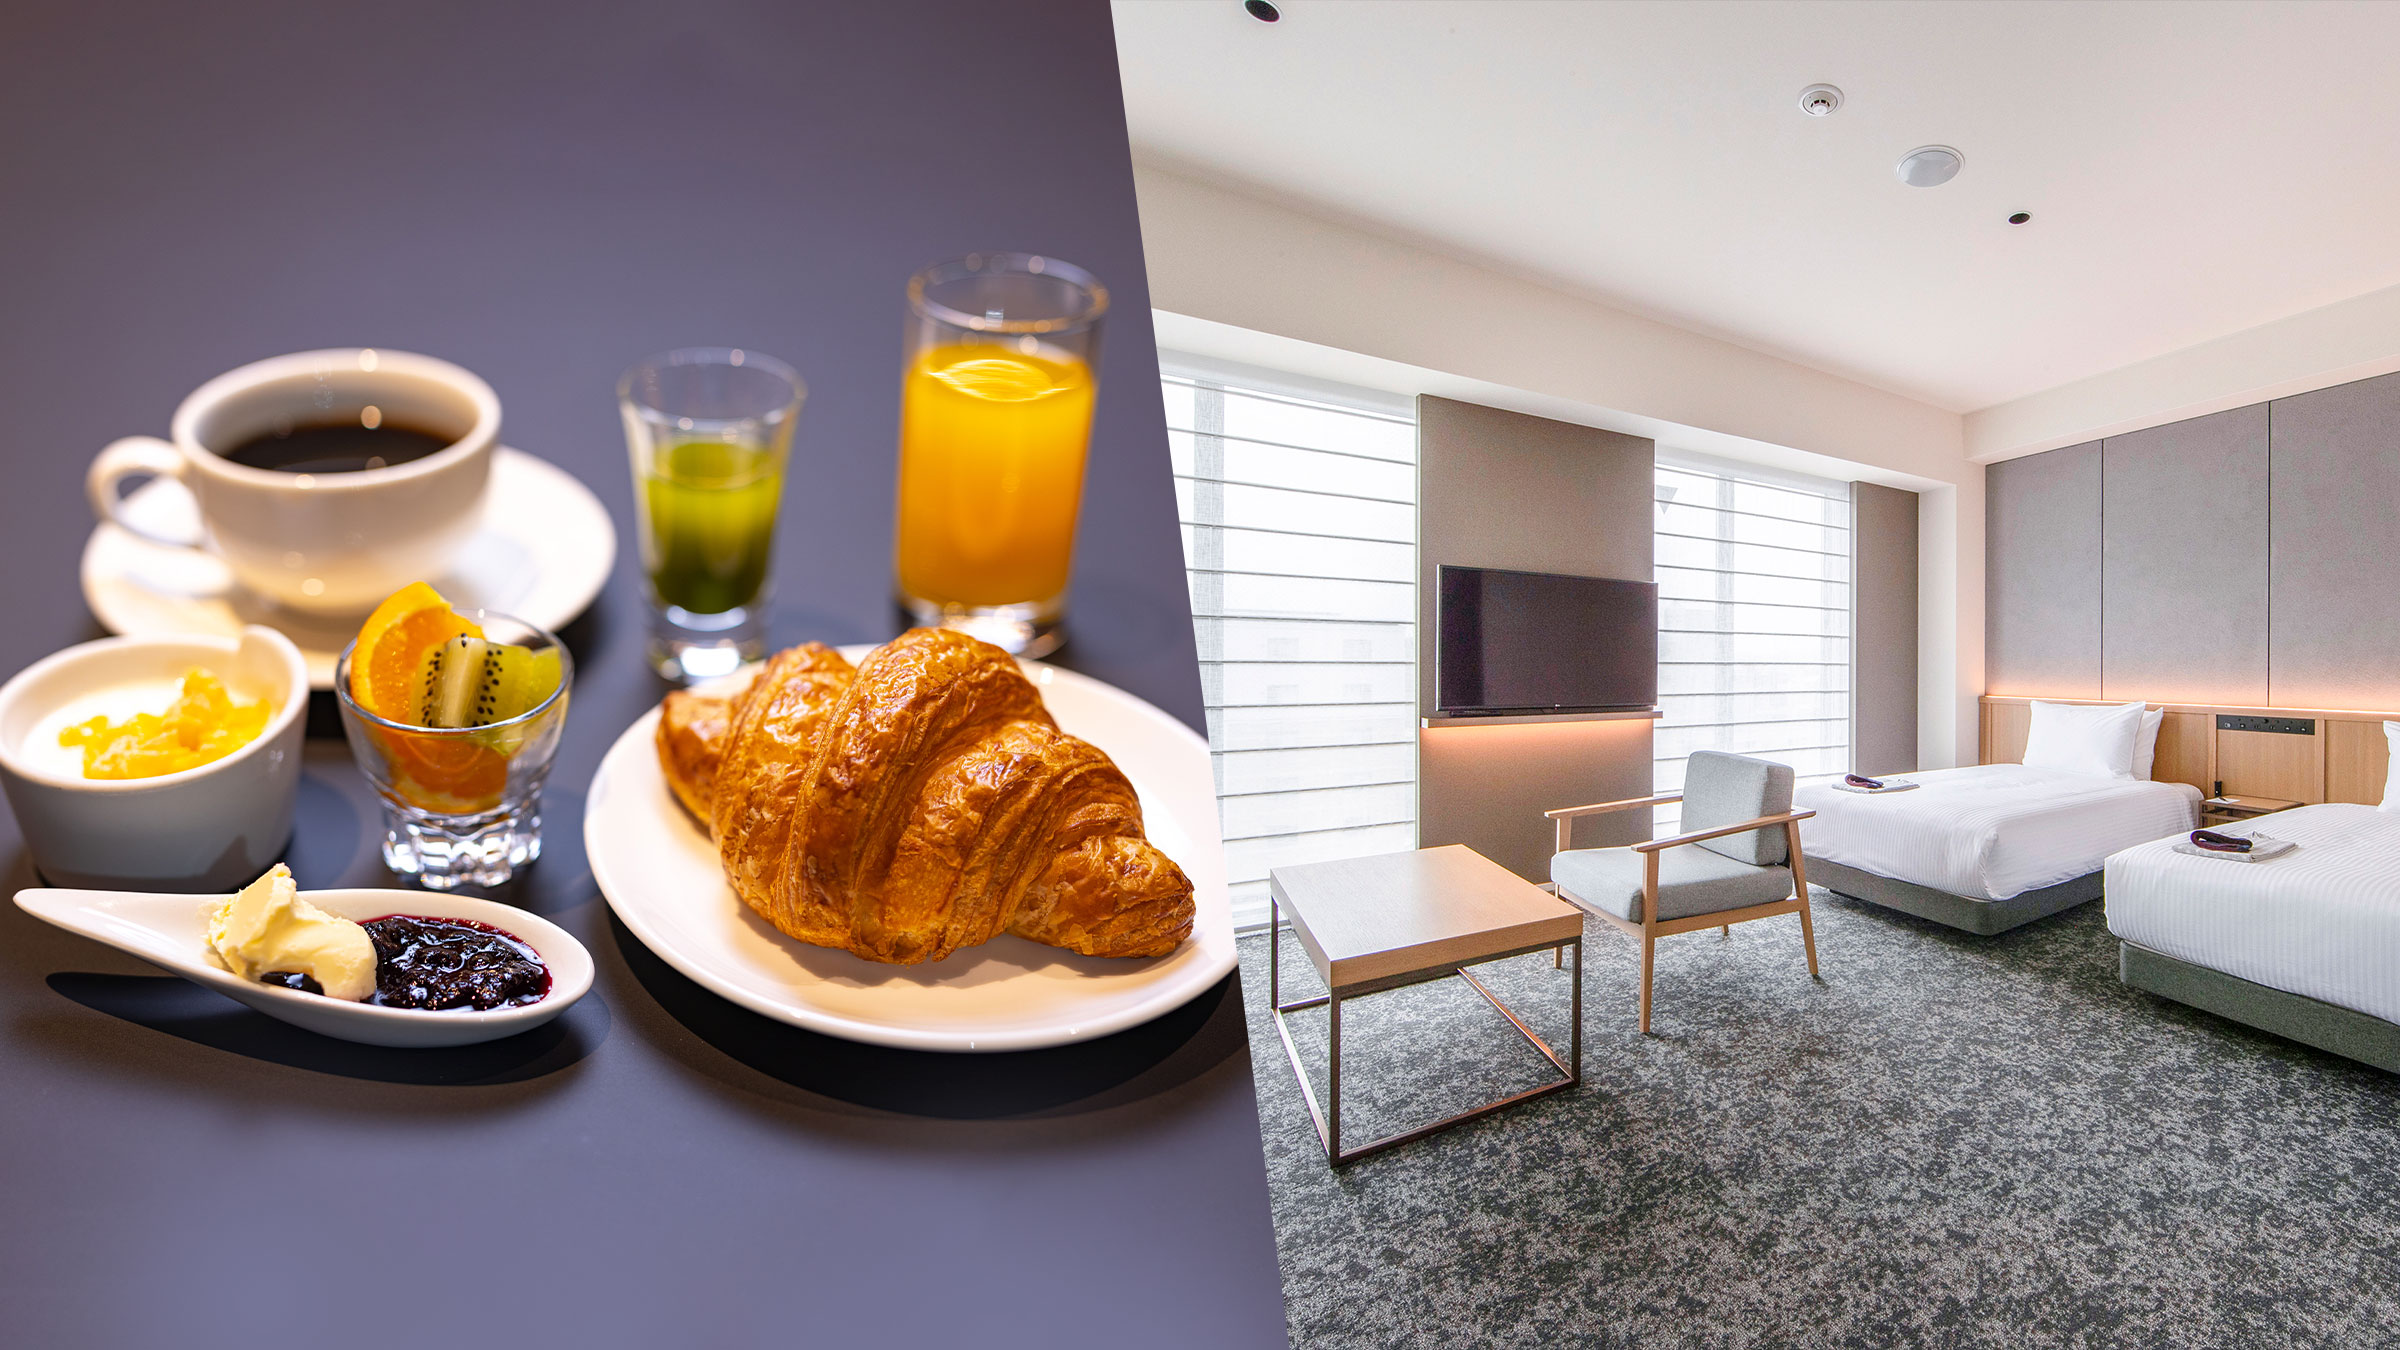 Bed and Breakfast offer at Park Hotel Kyoto